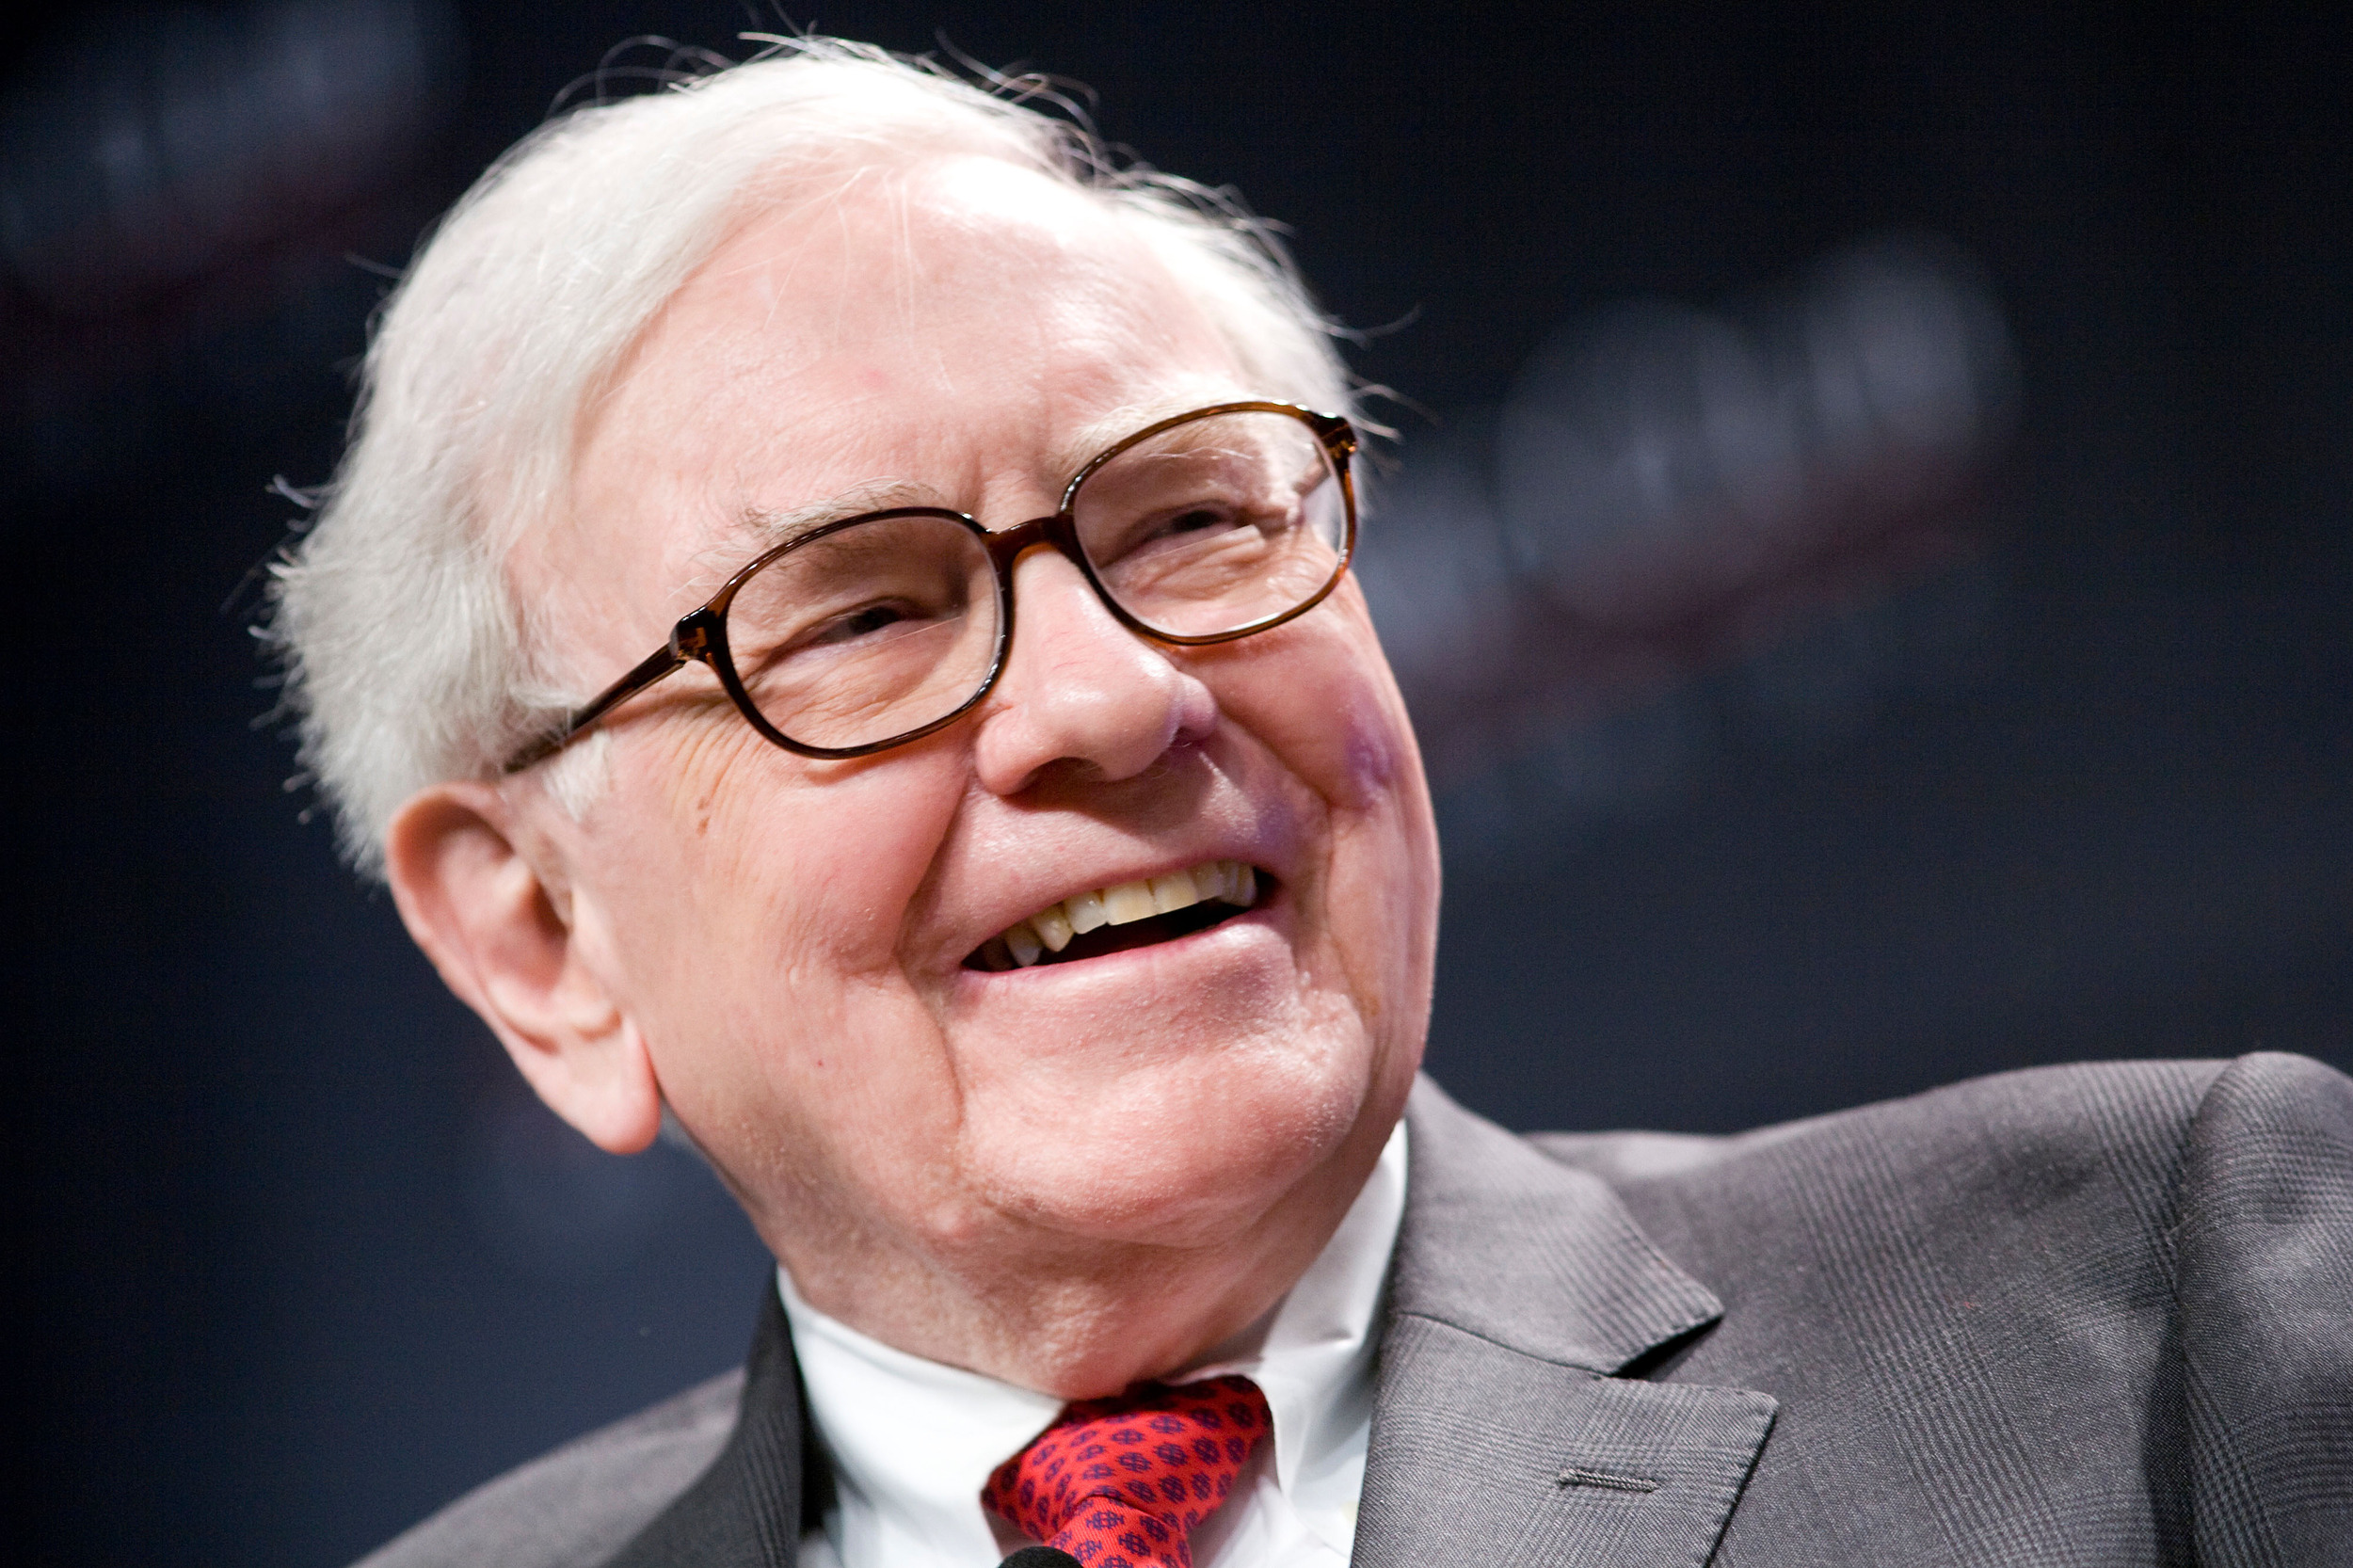 12 Inspiring Quotes Every Entrepreneur Should Live By